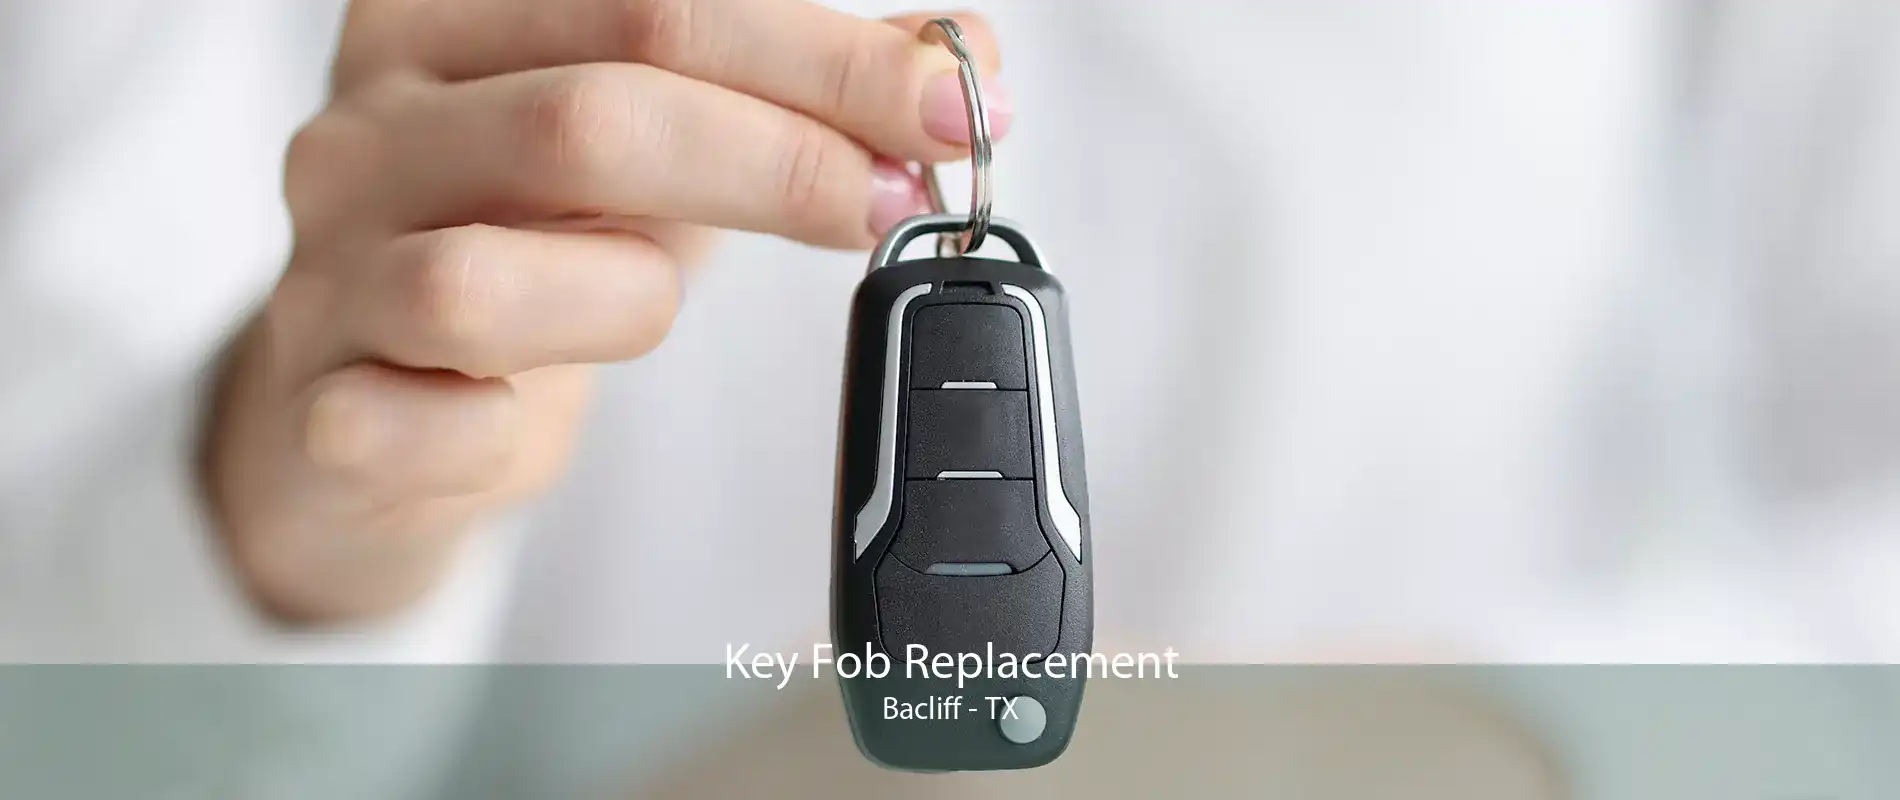 Key Fob Replacement Bacliff - TX